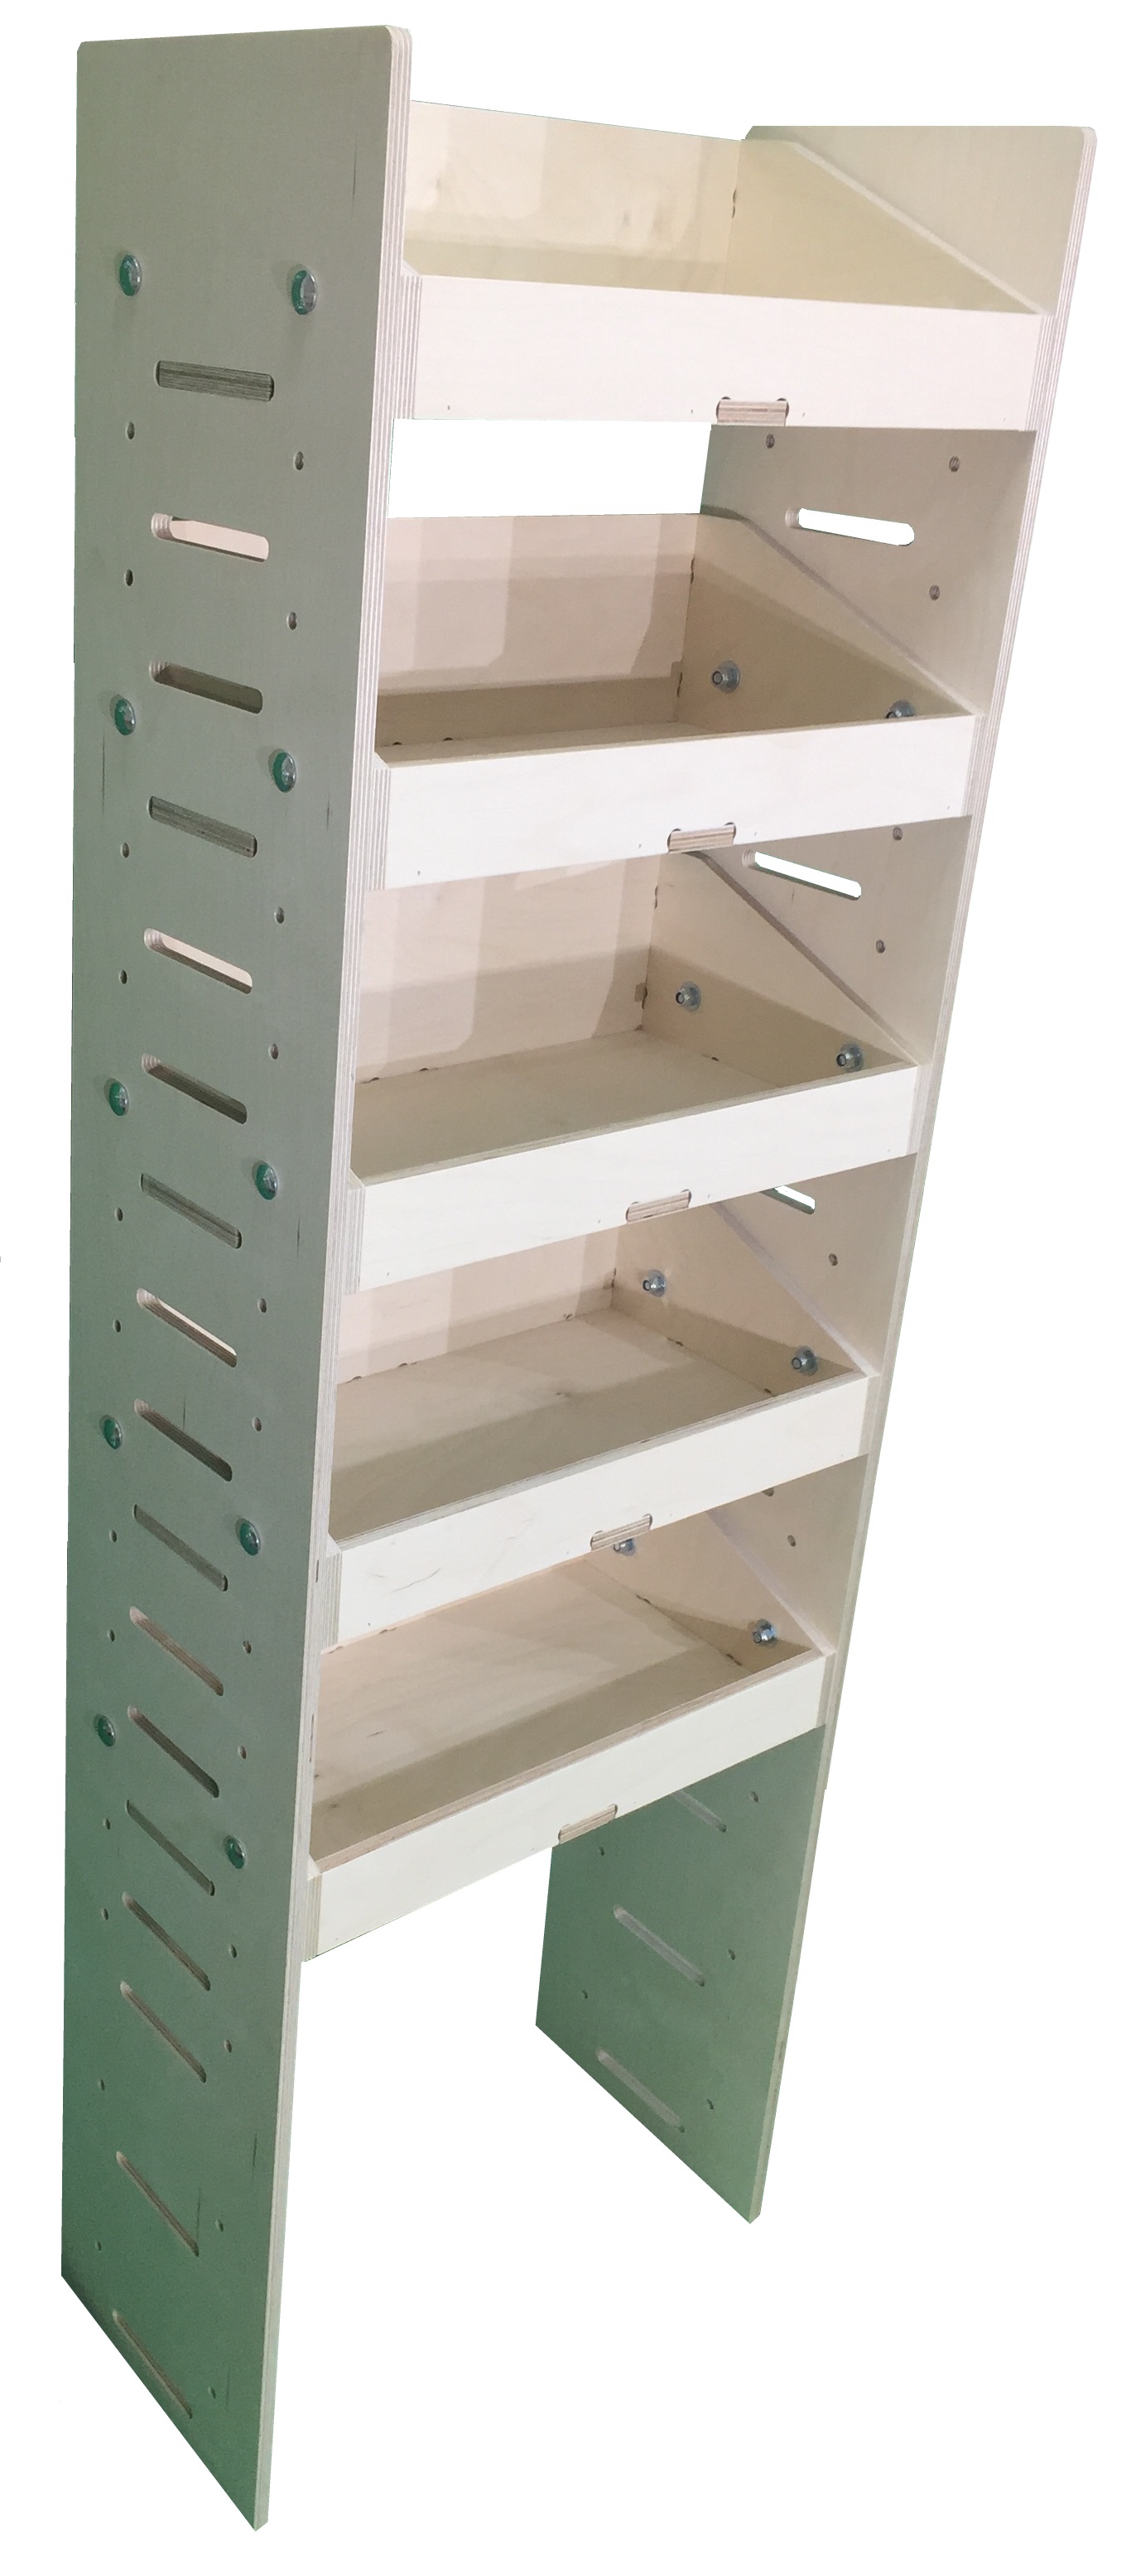 Van Plywood Shelving and Racking Storage System 1537mm(H) x 500mm(W) x 269mm(D) - BVR1550265